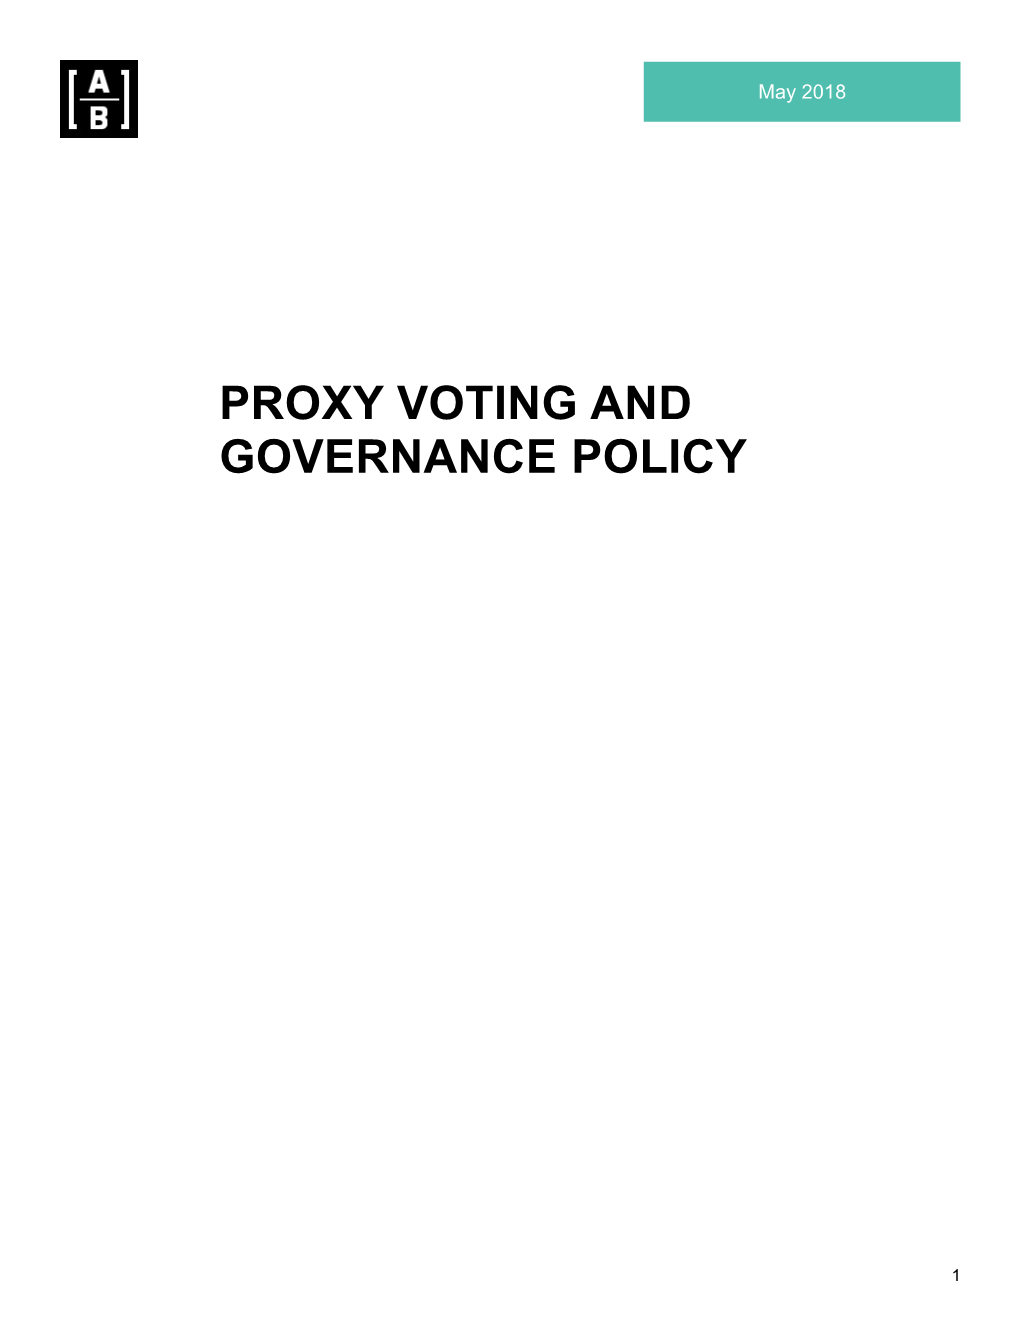 Proxy Voting and Governance Policy